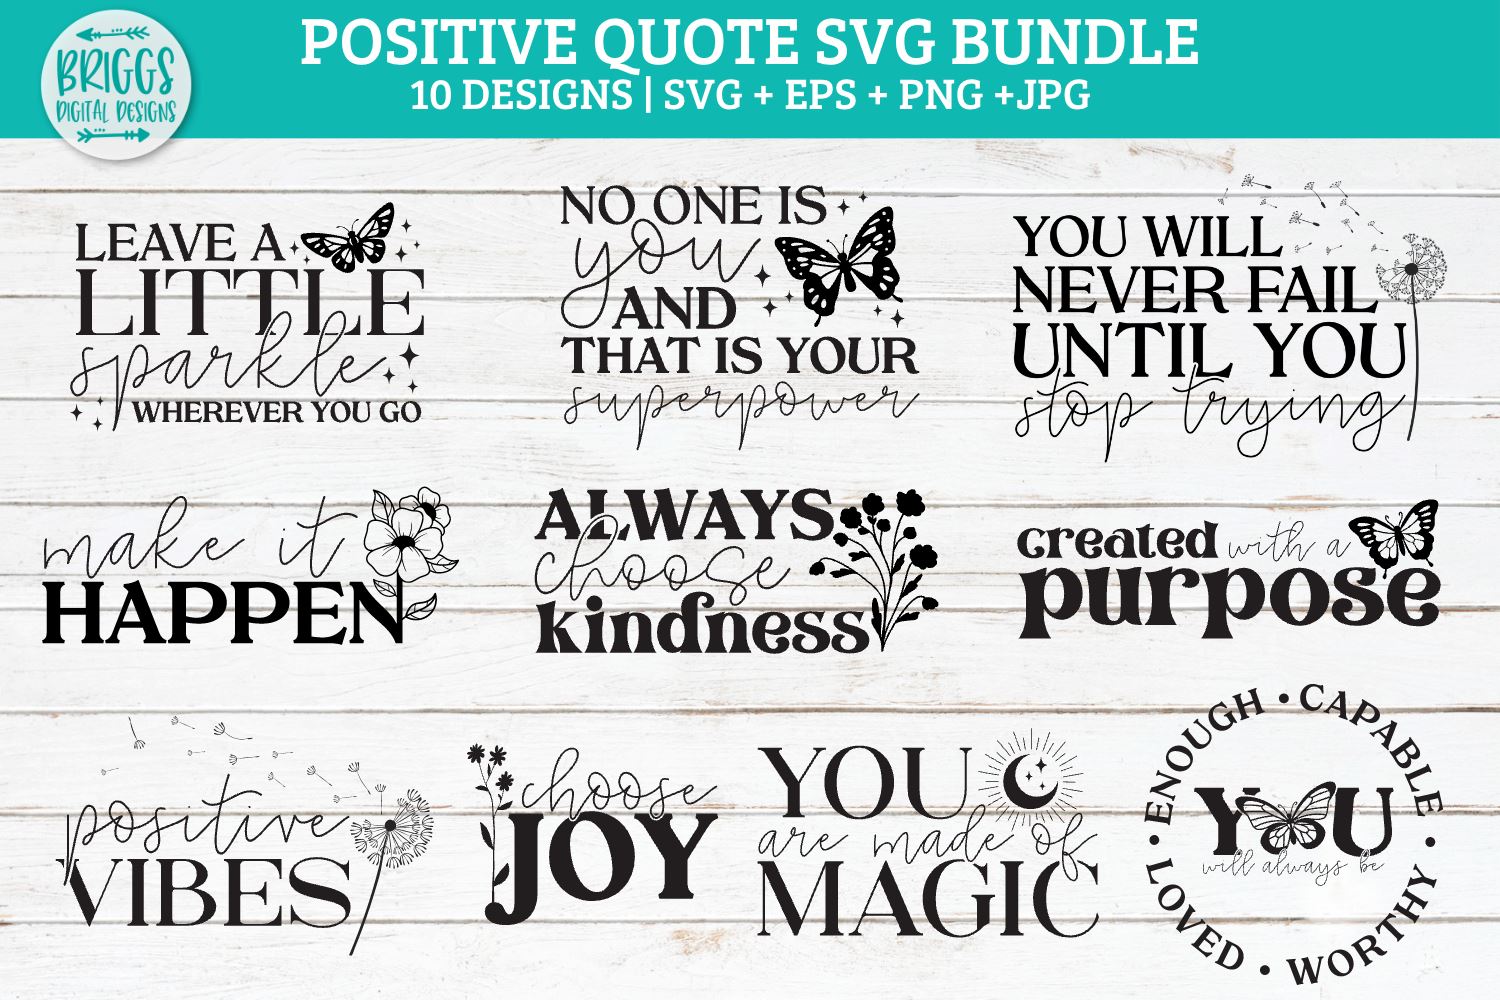 Think Happy Thoughts Svg, Positive Quotes, Vector File, Svg, Quote SVG,  Inspiration SVG, Cricut, Cut Files, Print